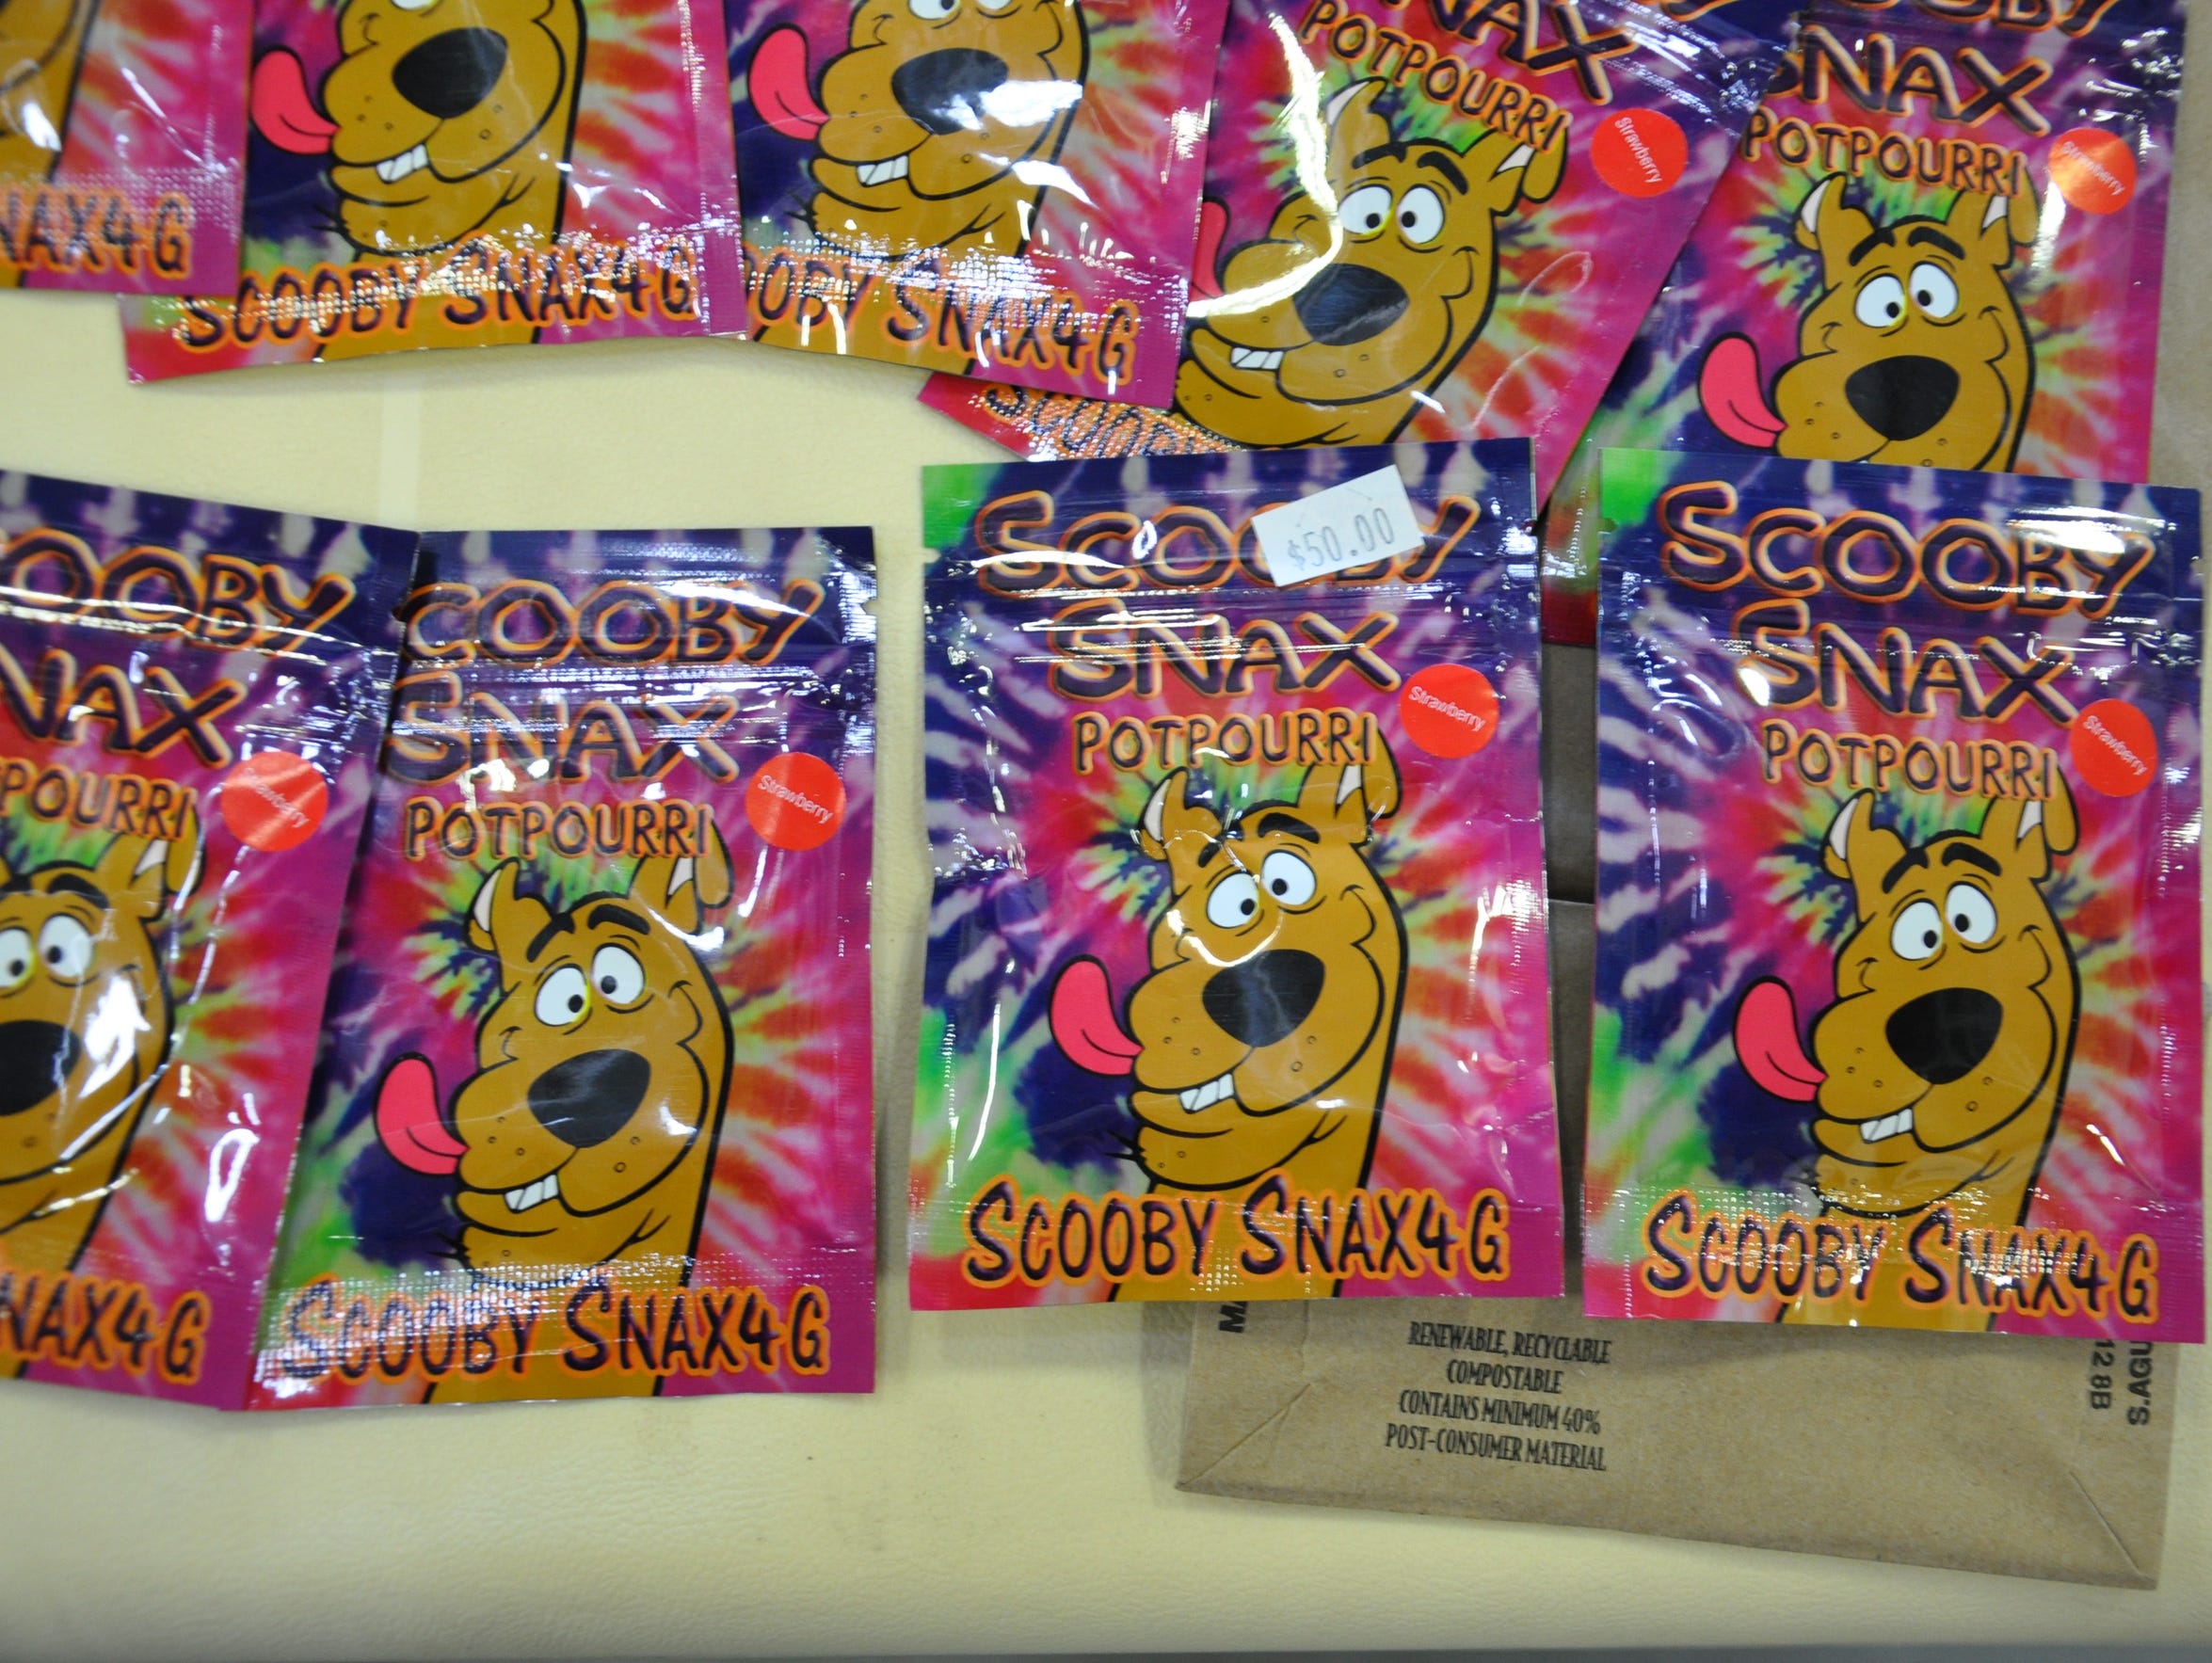 Packets advertising Scooby Snax contain the drug spice.